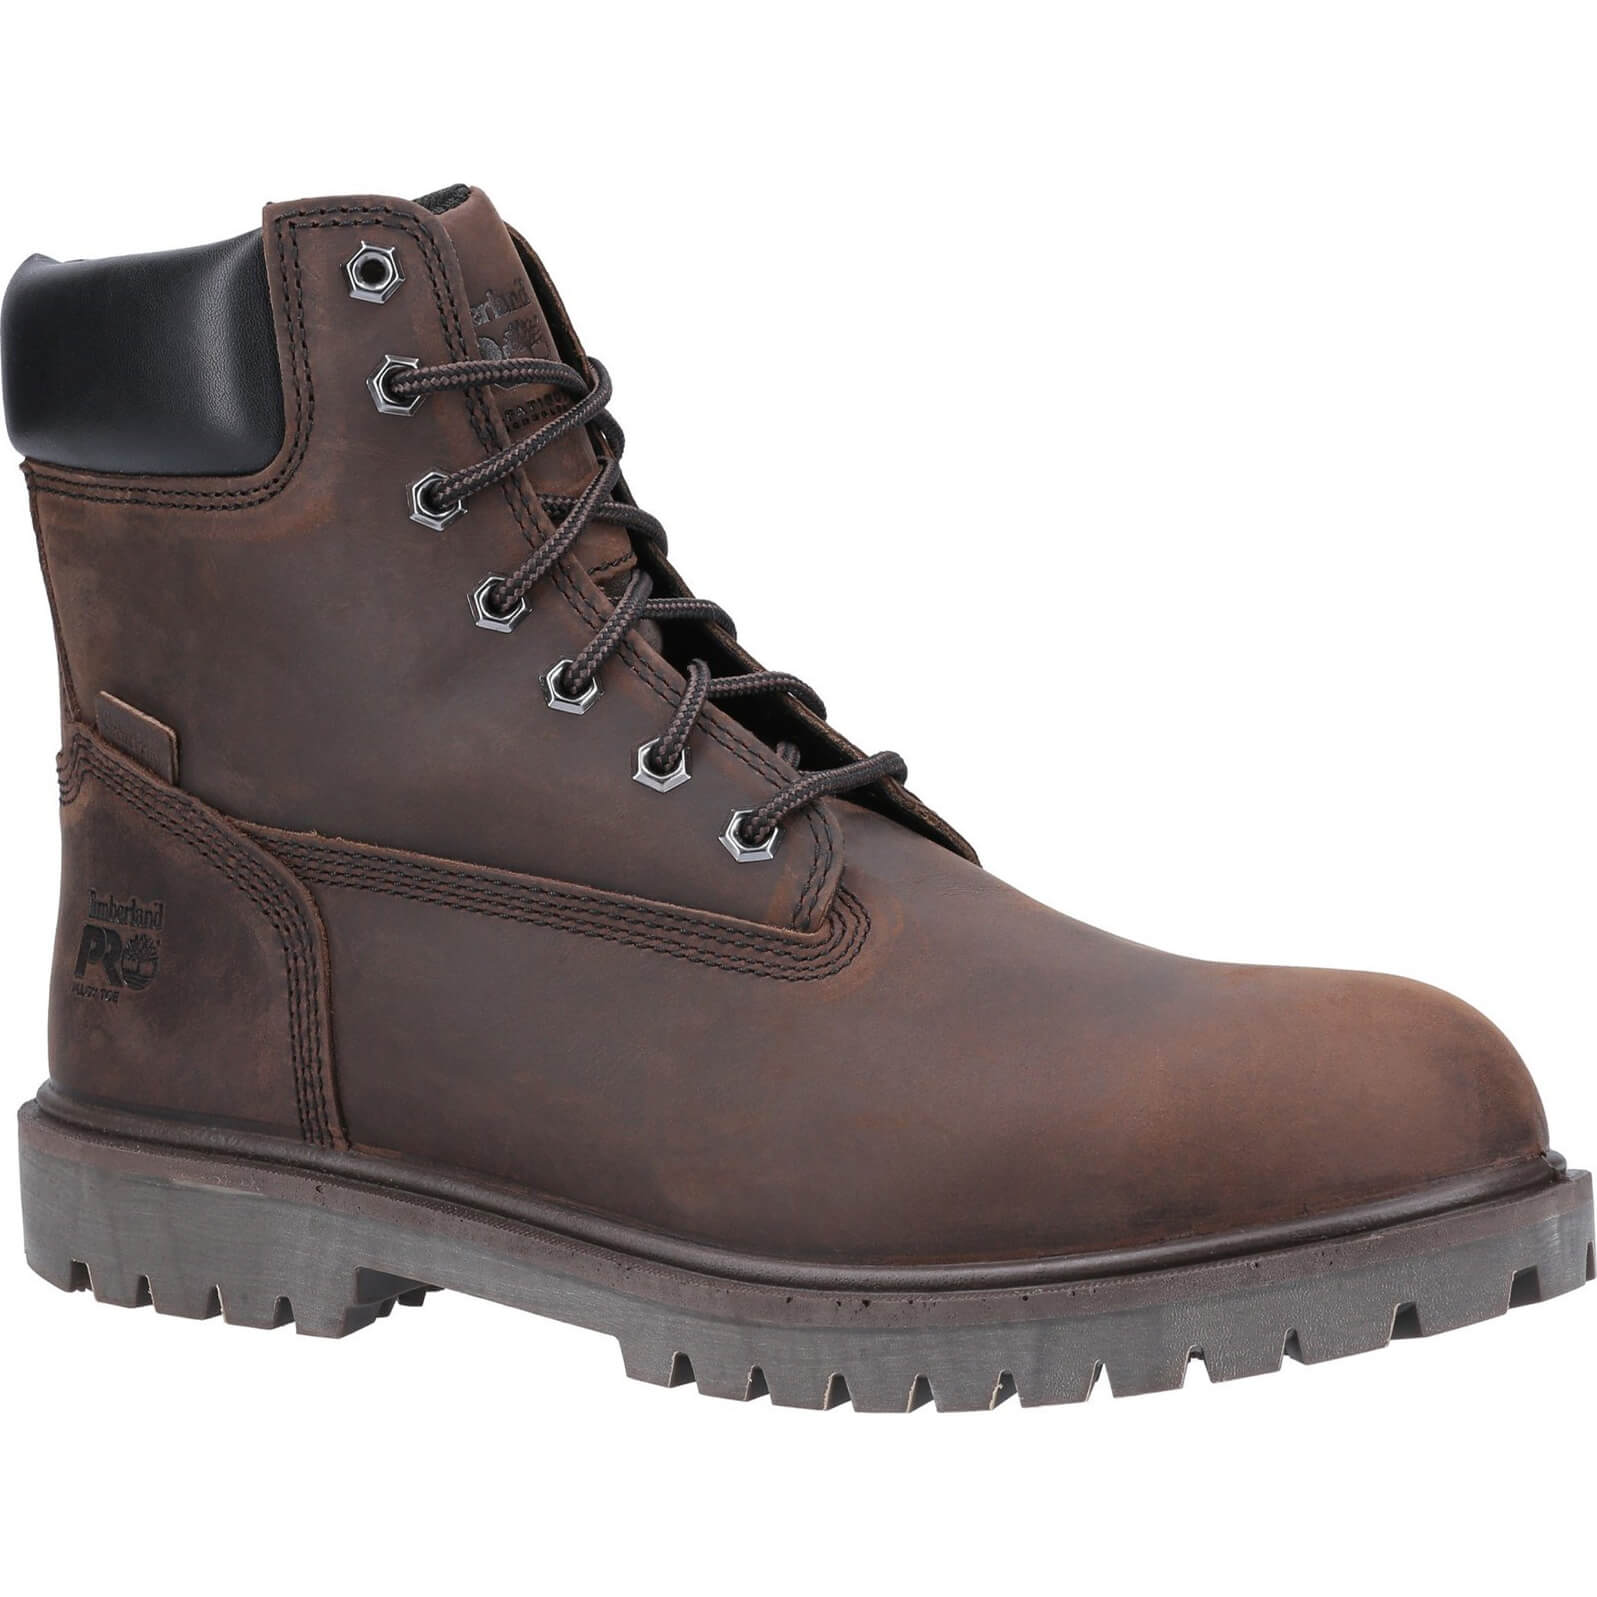 Image of Timberland Pro Iconic Safety Toe Work Boot Brown Size 7